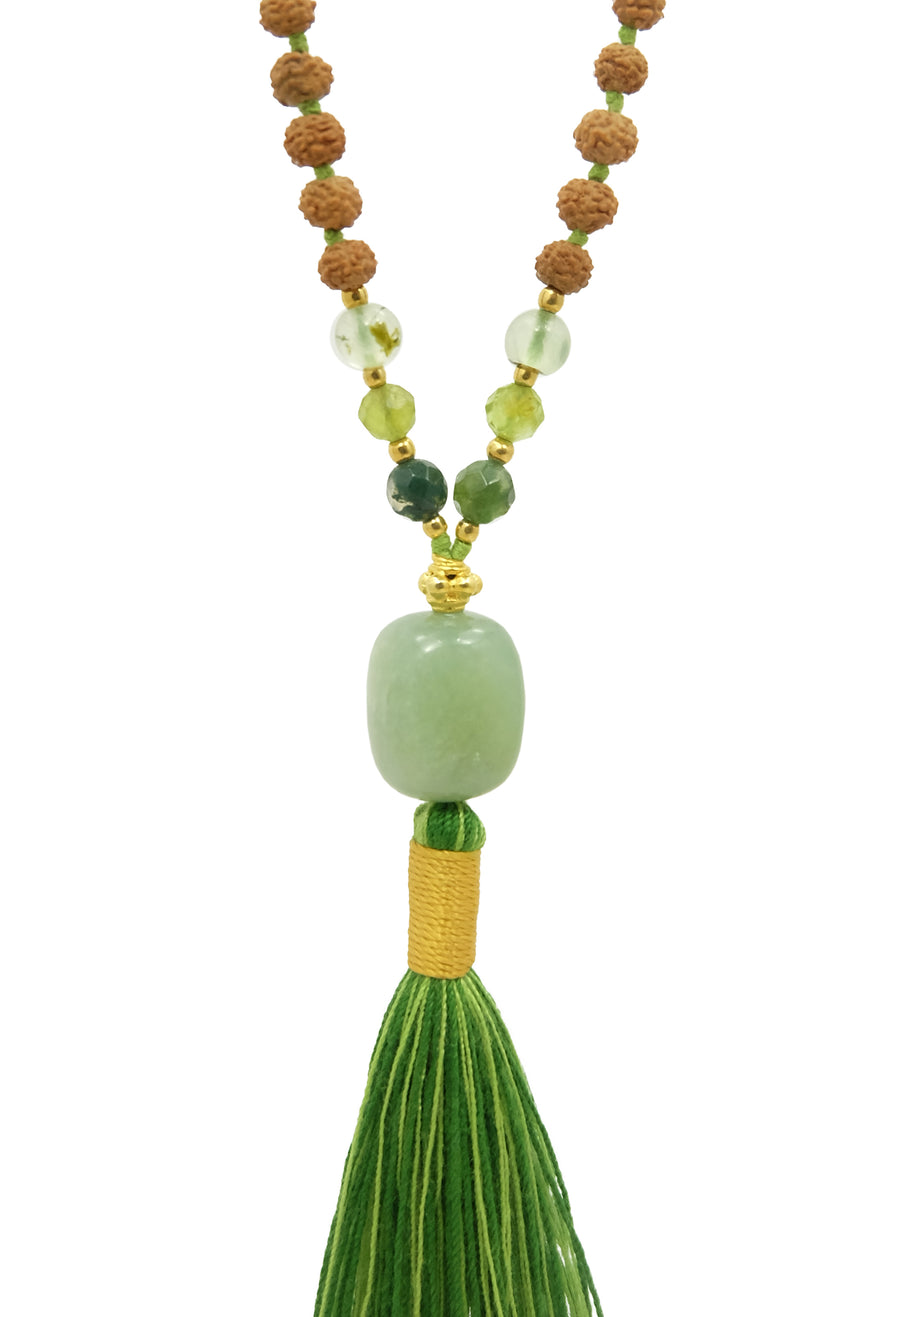 The Green Earth Goddess mala featuring aventurine, moss agate, prehnite and peridot evokes the cool lushness of ferns by the creekside, misty boulders covered in resilient moss, and the verdant abundance of a summer garden. 